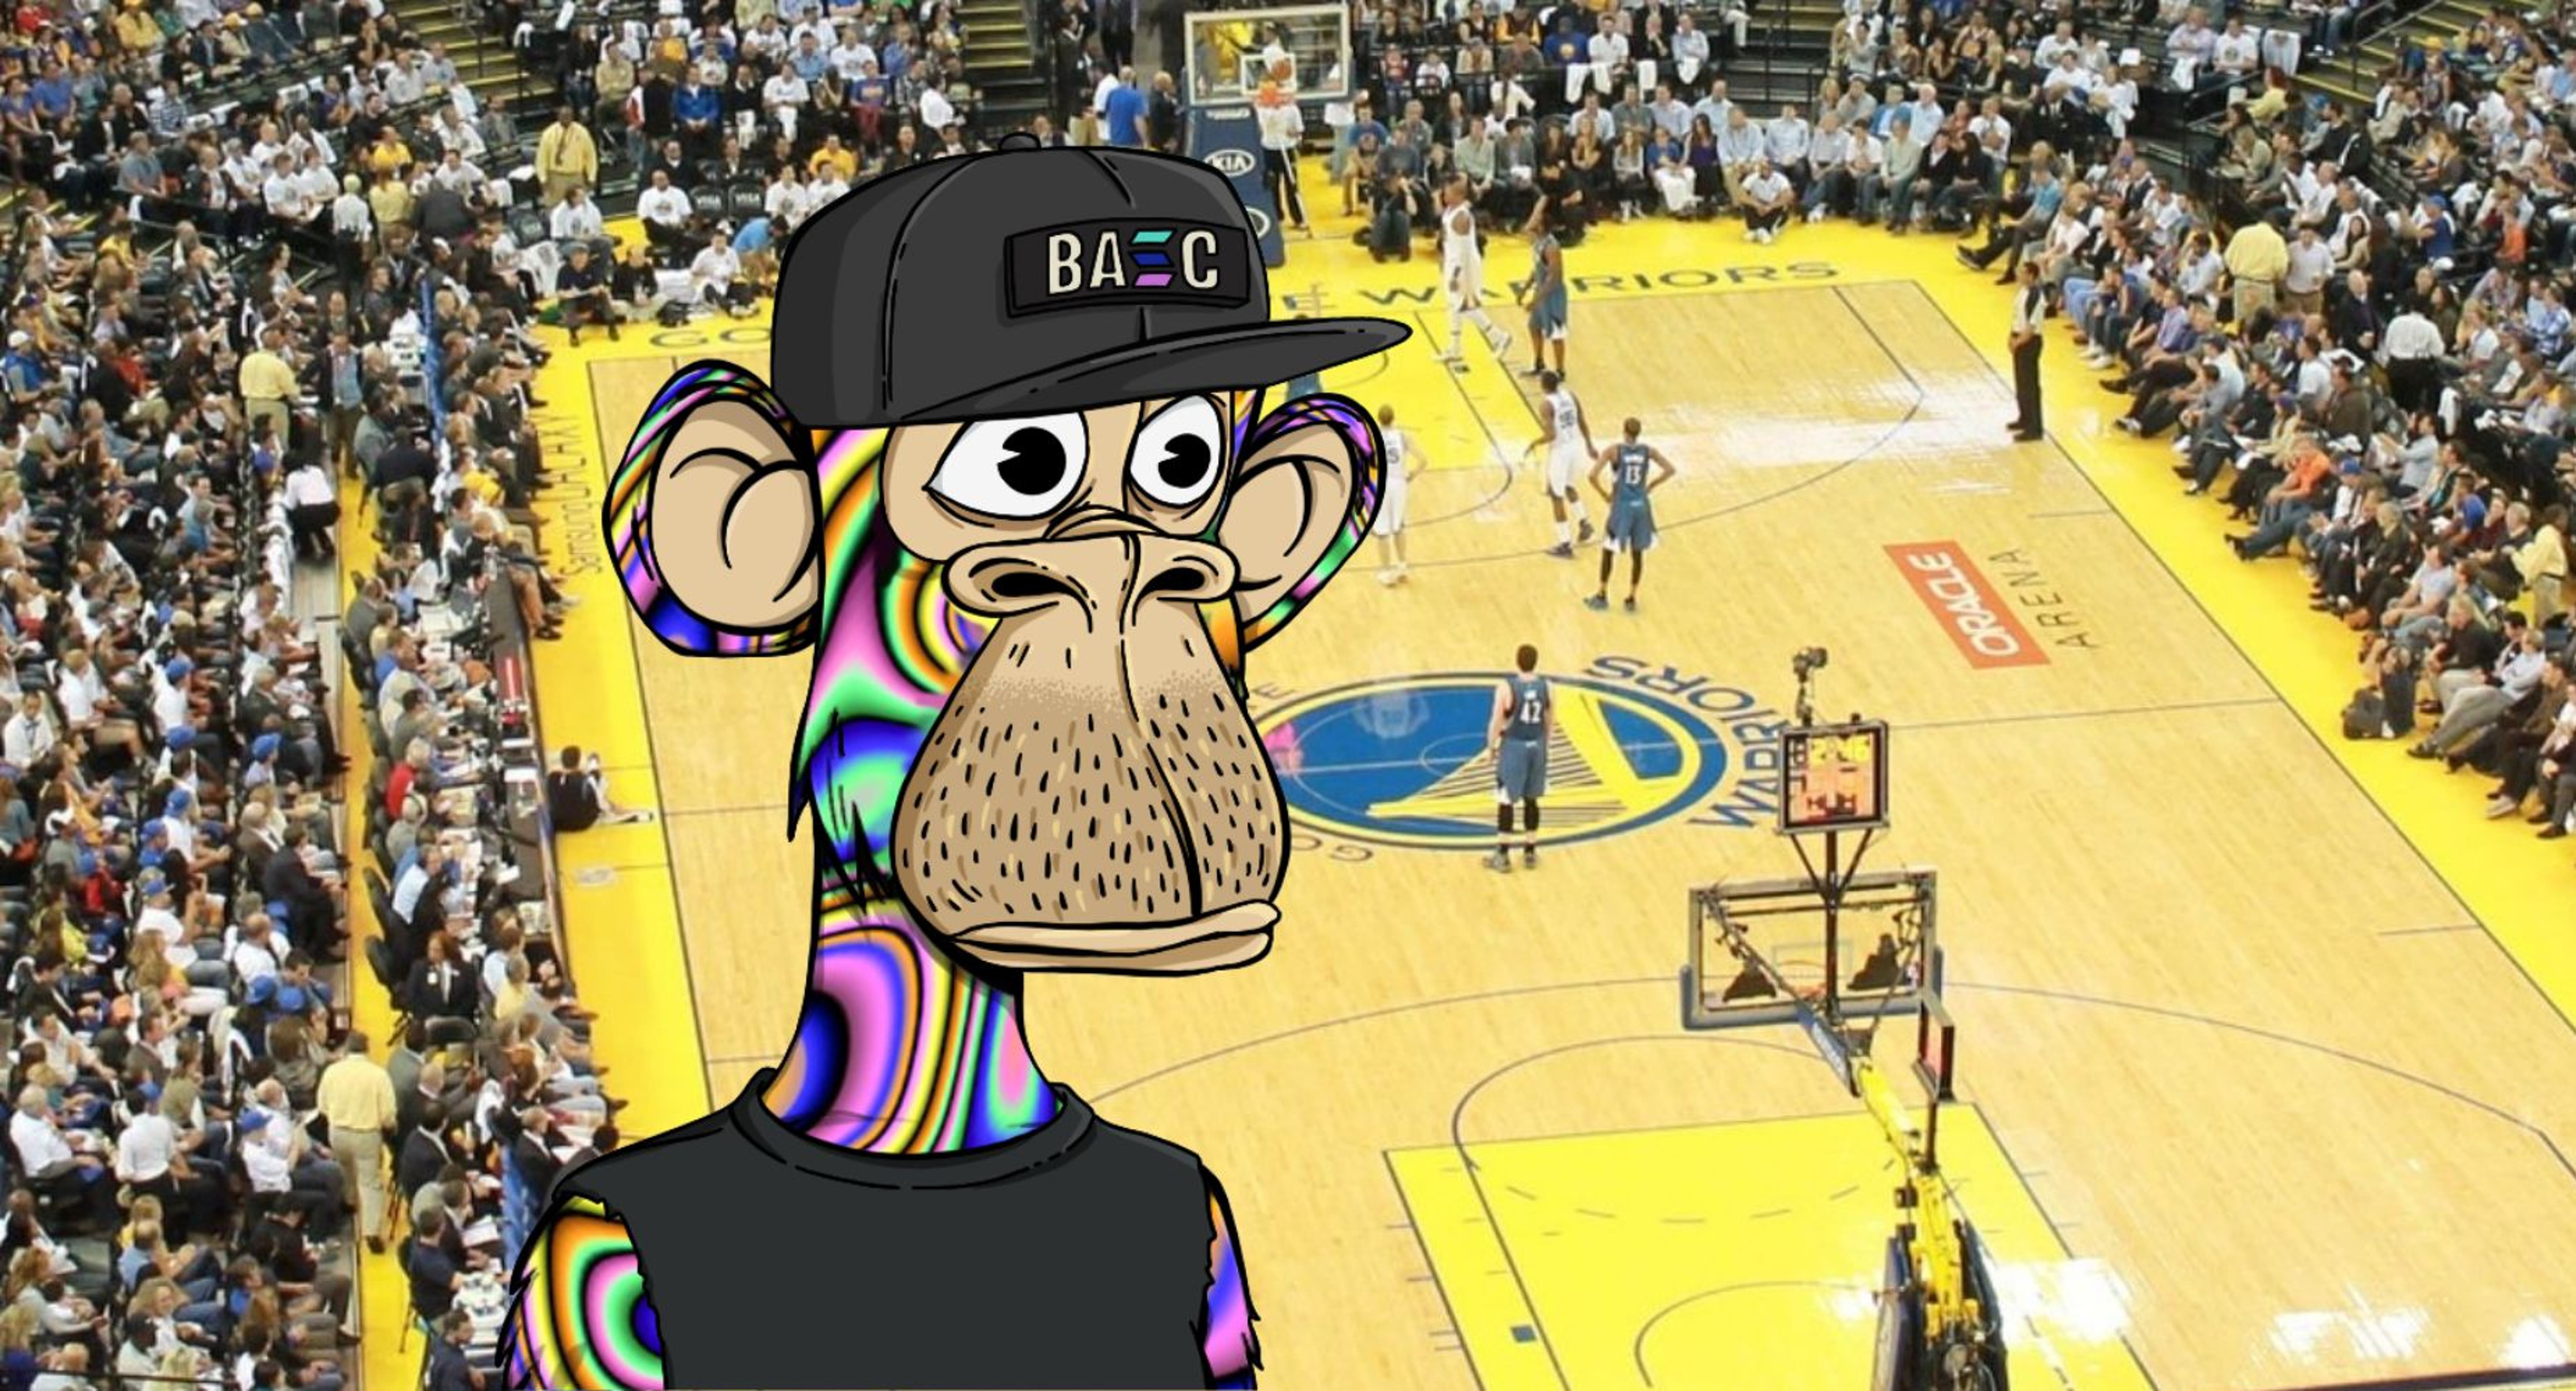 2 Bored Ape Yacht Club NFT Holders Win NBA Championship: Here Are The Players And Which Apes They Own